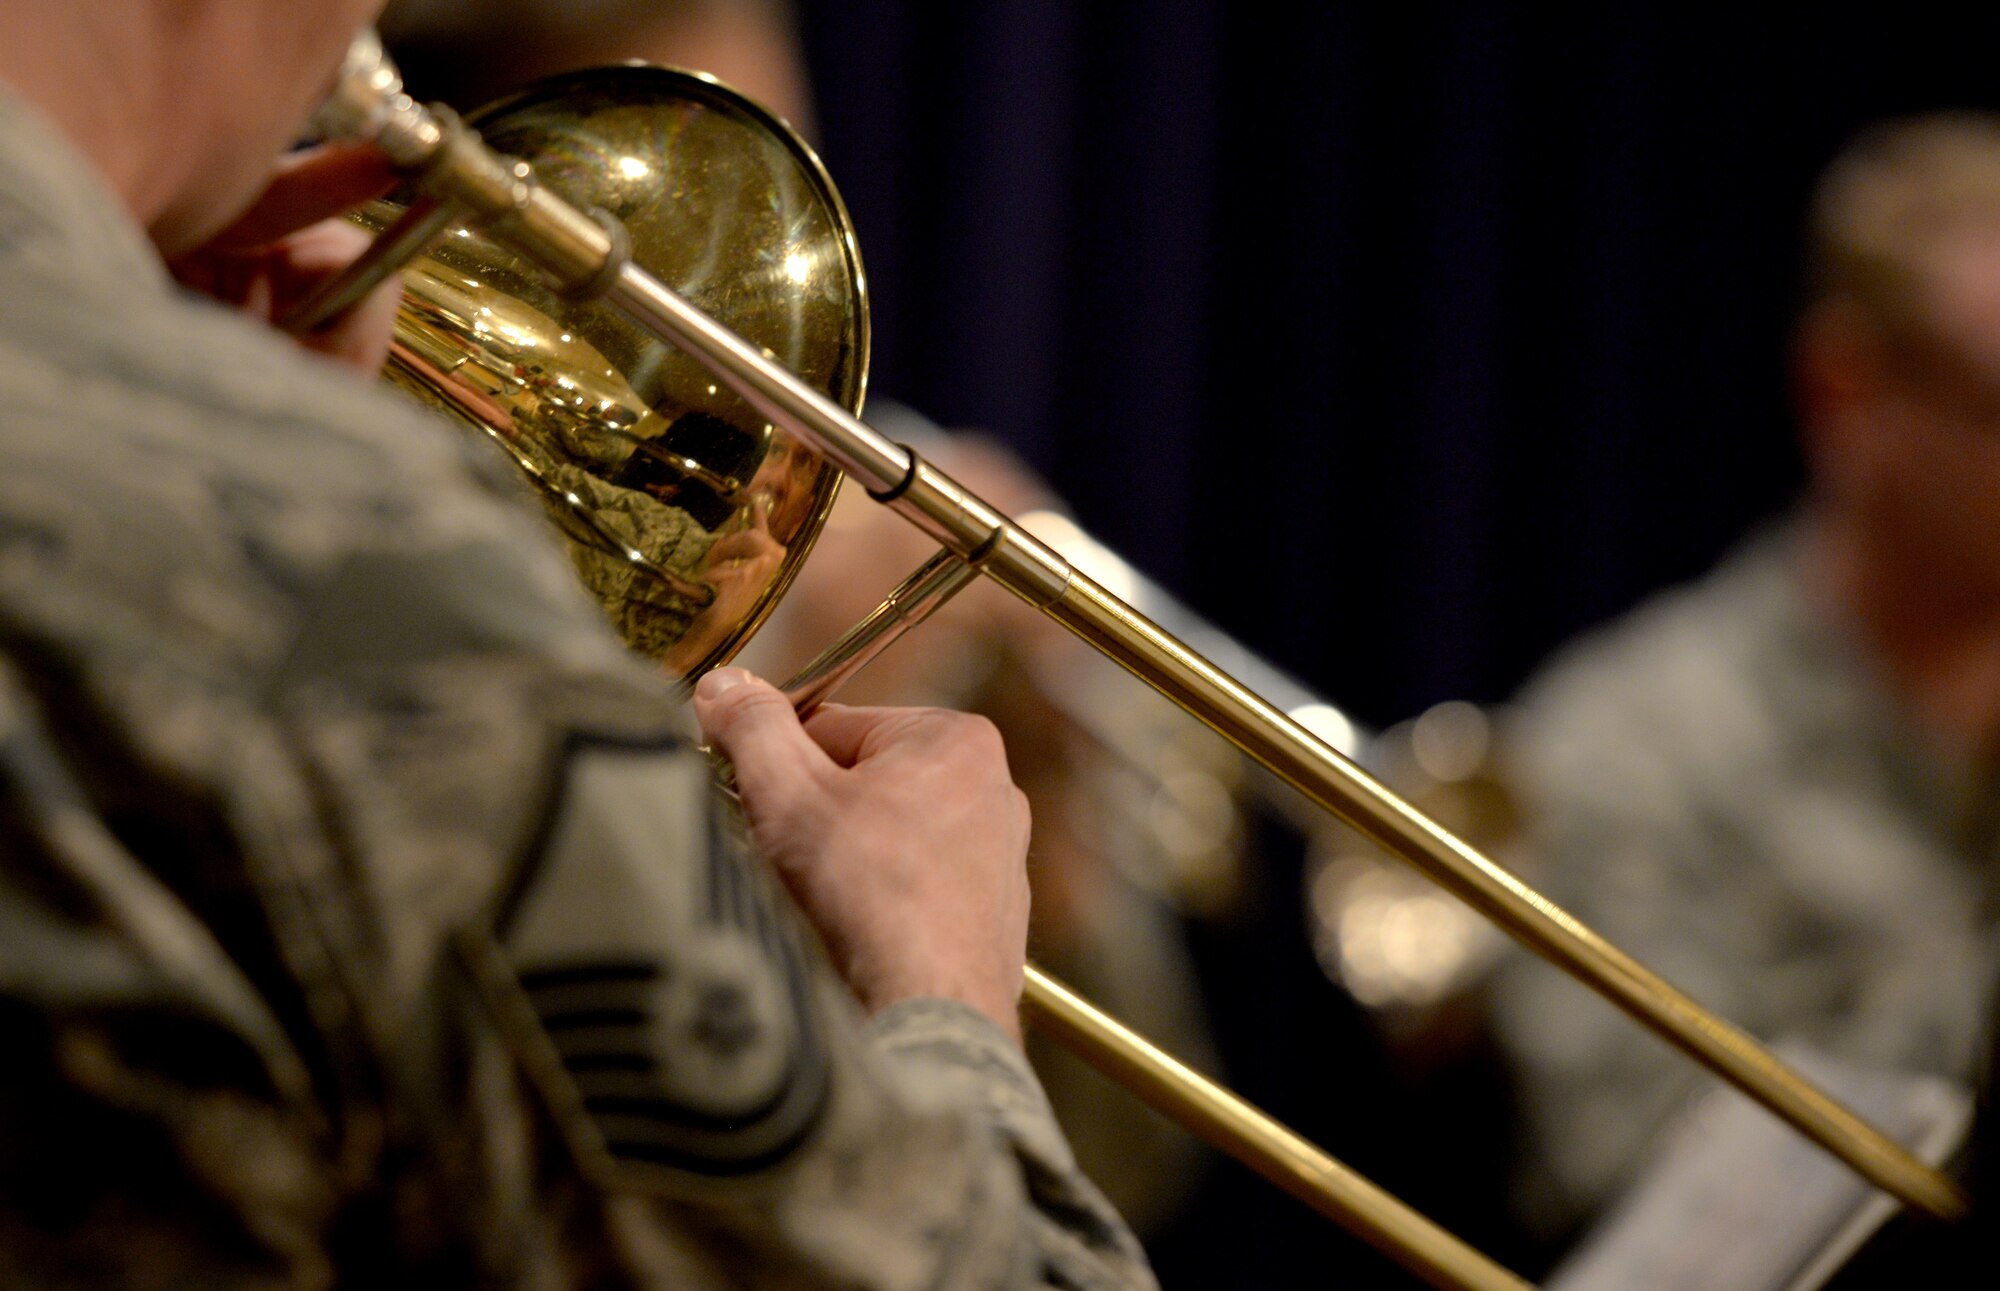 Master Sgt. Benjamin Kadow, U.S. Air Force Heartland of America Band trombone player, plays at trumpet during the Offutt Christmas Tree Lighting event at the Patriot Club, Offutt Air Force Base, Nebraska, Dec. 6, 2018. The band’s brass ensemble played multiple sets throughout the night while an estimated 1,500 base members moved throughout the club participating in numerous events. (U.S. Air Force photo by Josh Plueger)